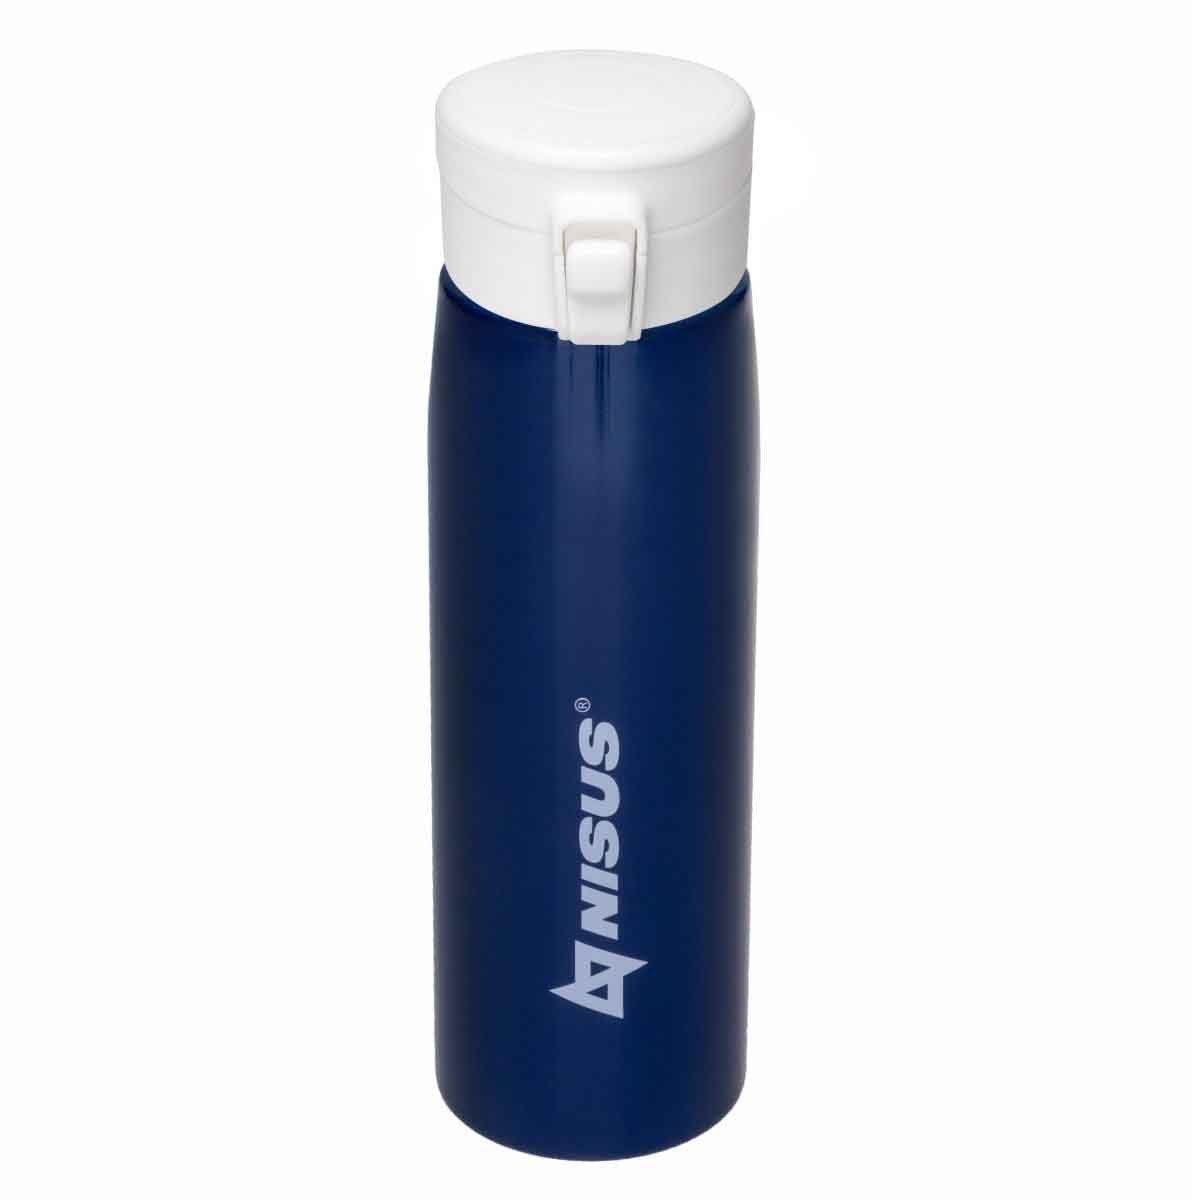 Push Button Lid Water Bottle, Stainless Steel, 16 oz, Blue